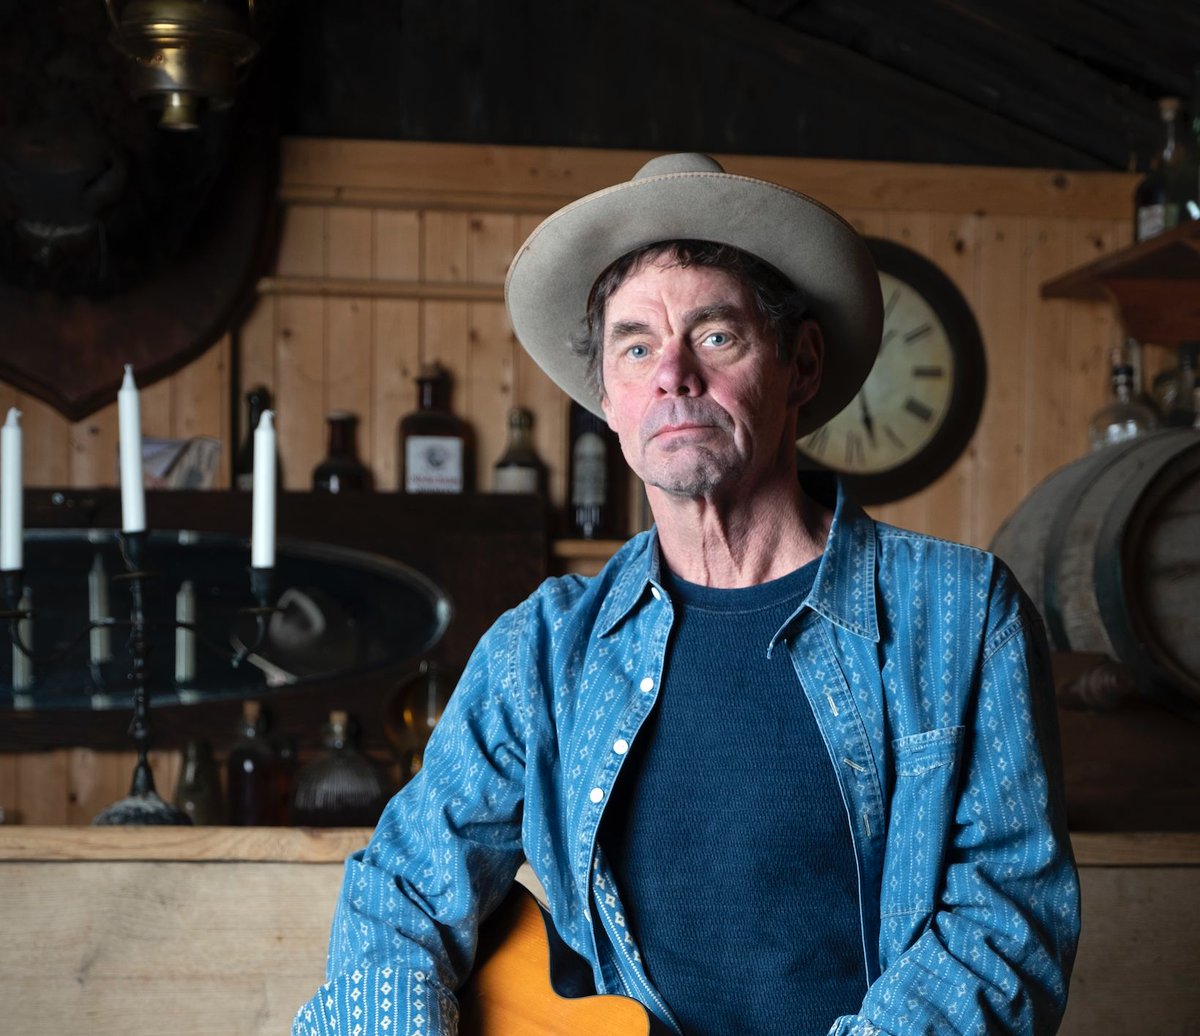 💥NEW SHOW💥 We're delighted to announce that the incredible Rich Hall is coming back to Regal this year on Monday 20th November! Tickets will go on sale this coming Monday at 6pm!